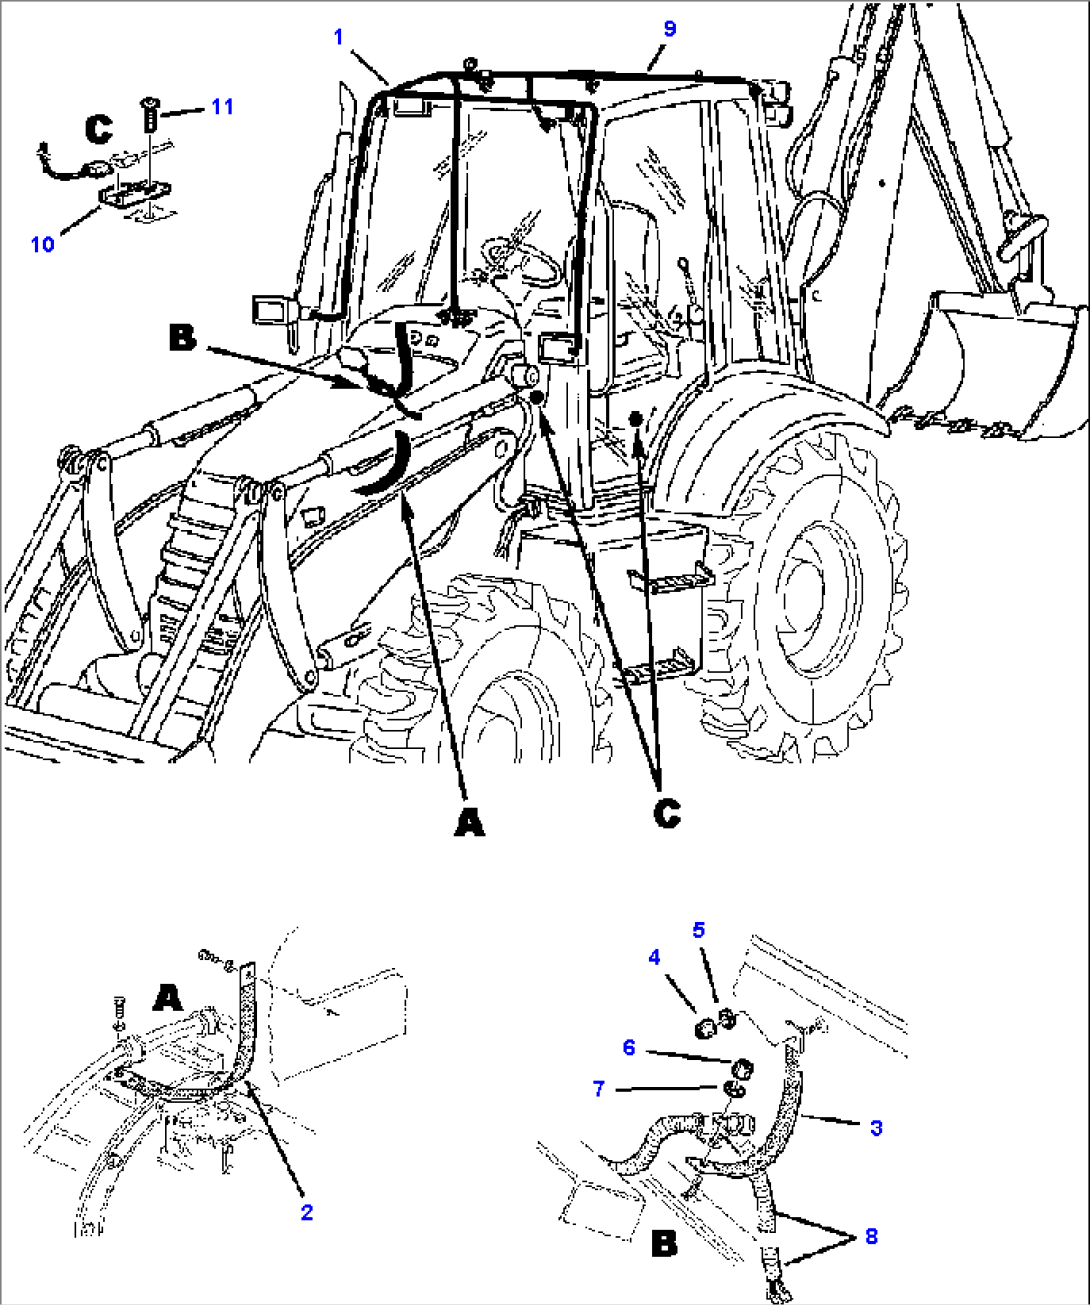 FIG. E1501-02A0 ELECTRICAL SYSTEM - CAB/CANOPY WIRING AND GROUND STRAPS